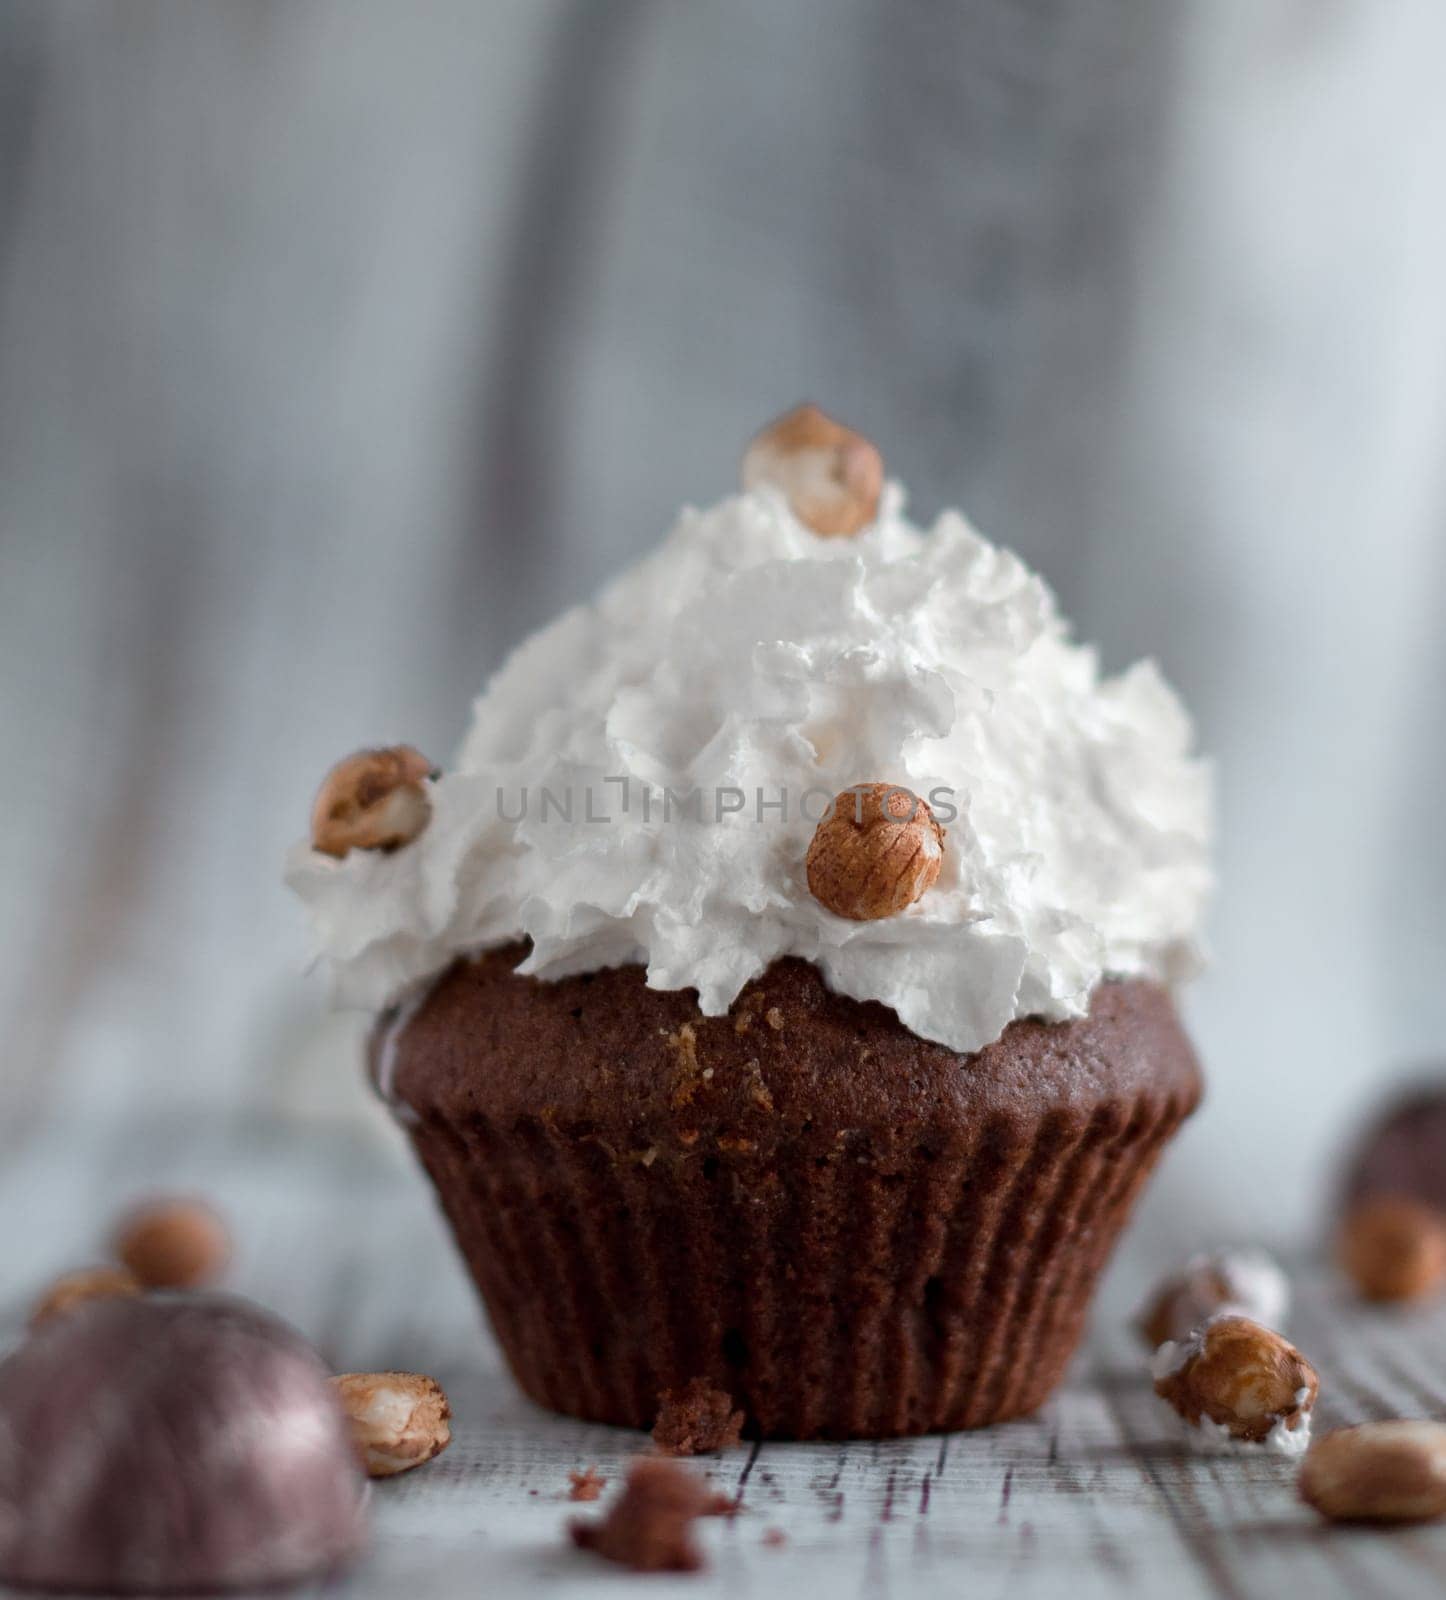 Delicious chocolate brownie muffins with nuts and whipped cream